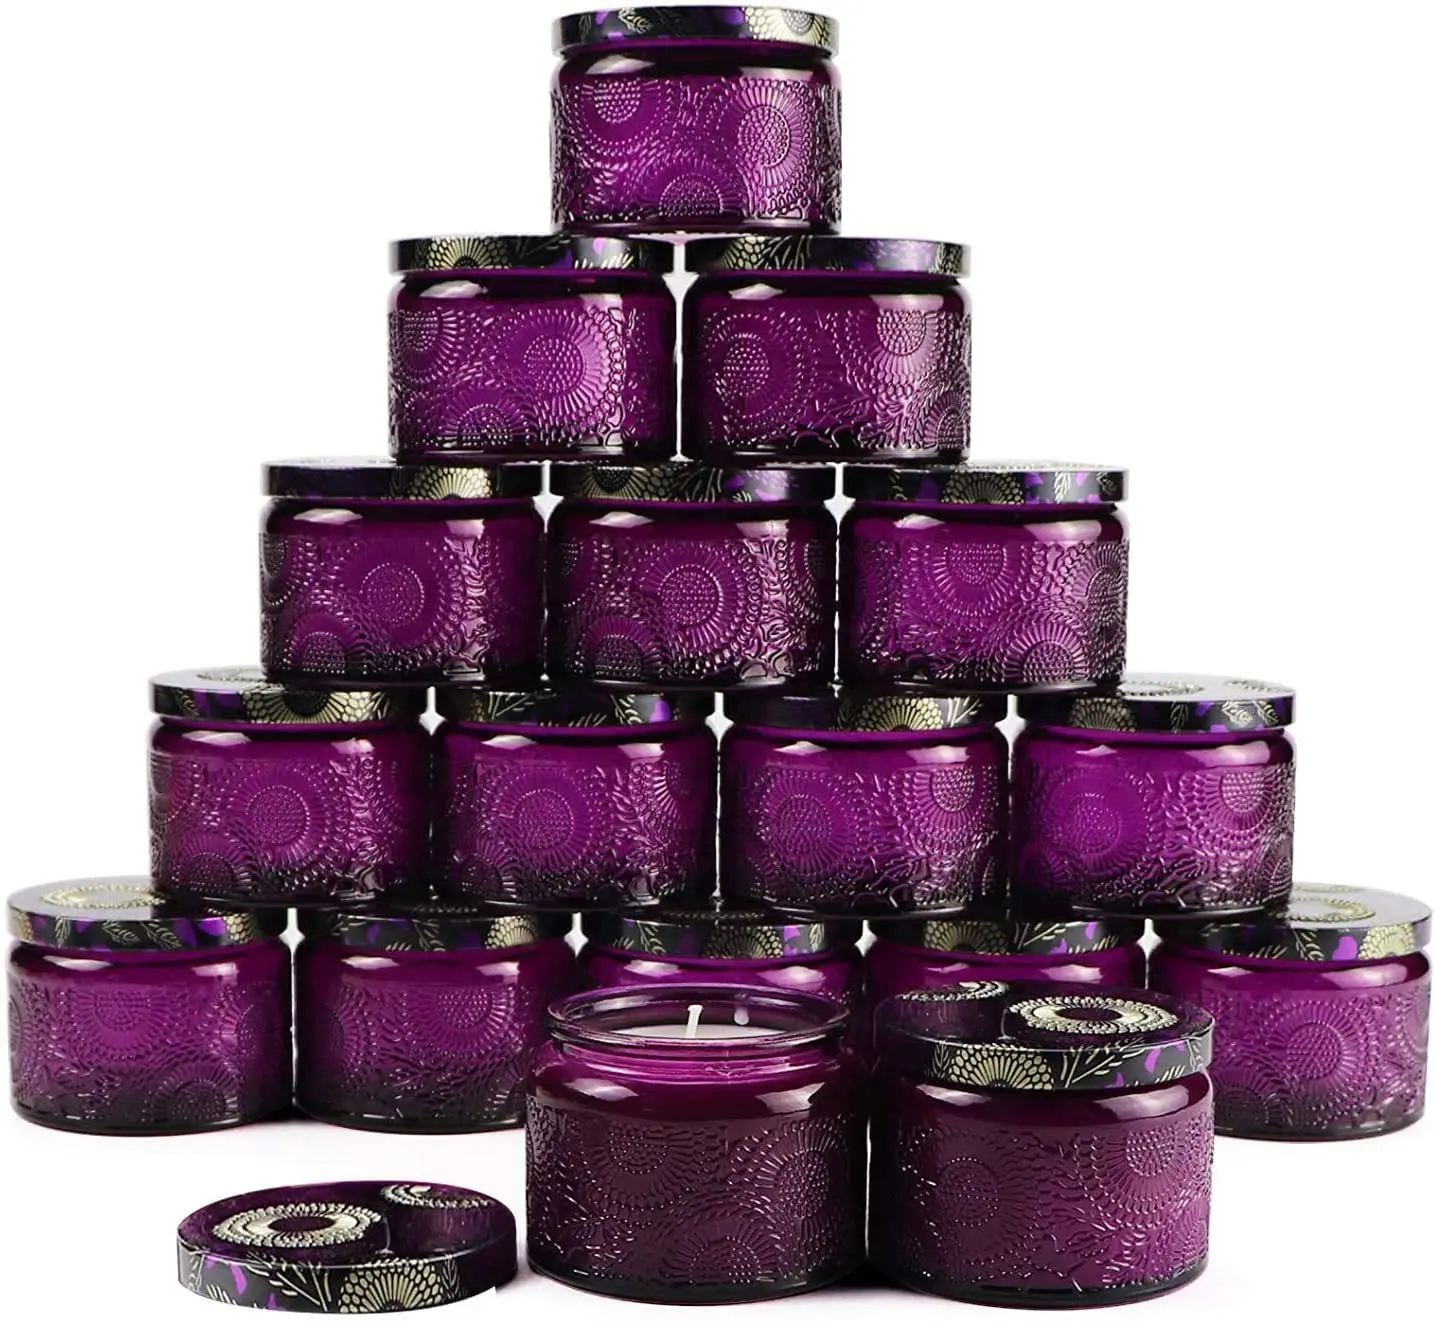 JD C 1613 Hot 120ml embossed round pattern candle jar Colored scented candle holder embossed glass candle cup with lid purple (1600387630227)